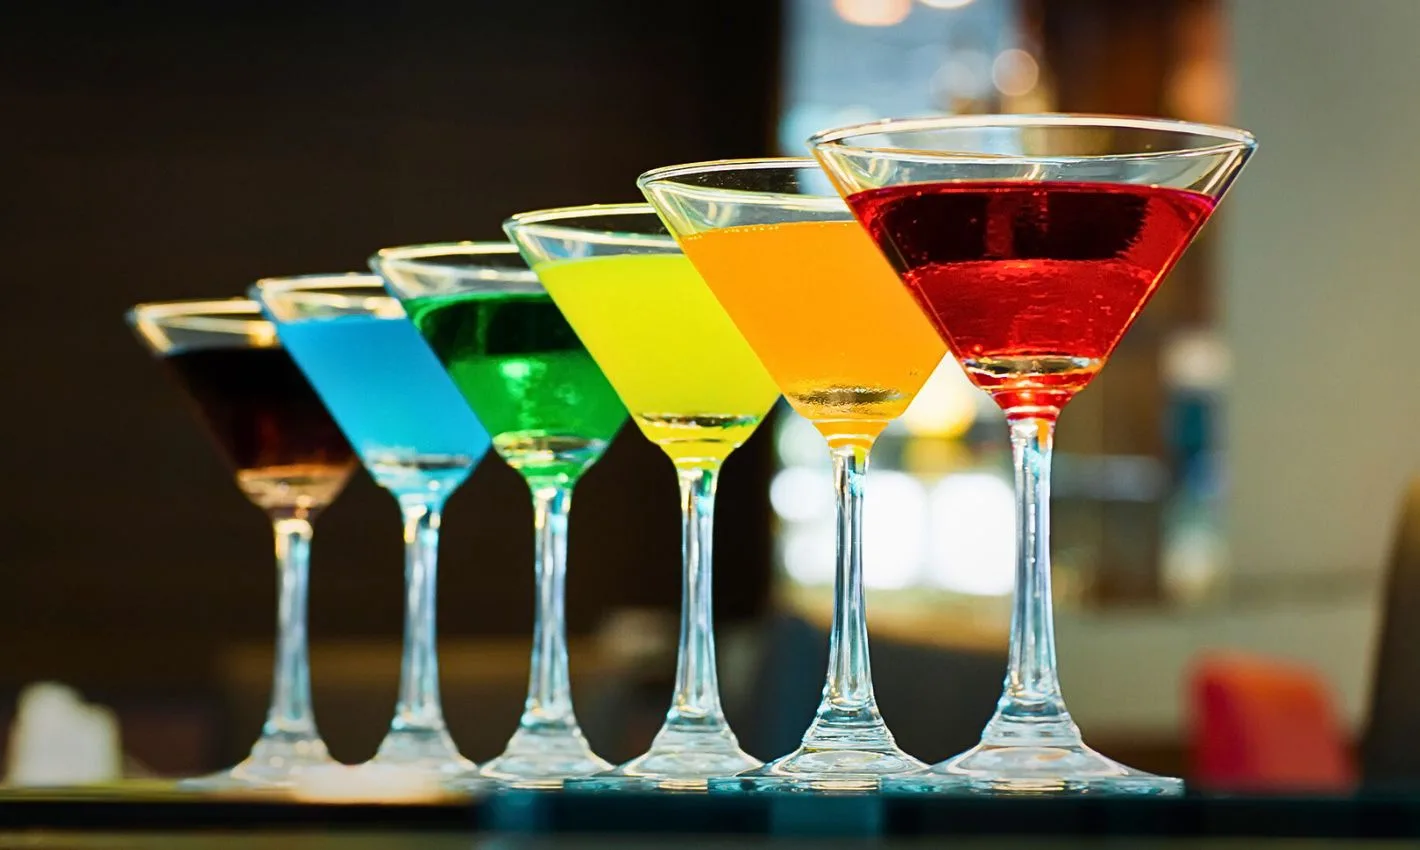 rainbow martini cocktails lined up on a bar